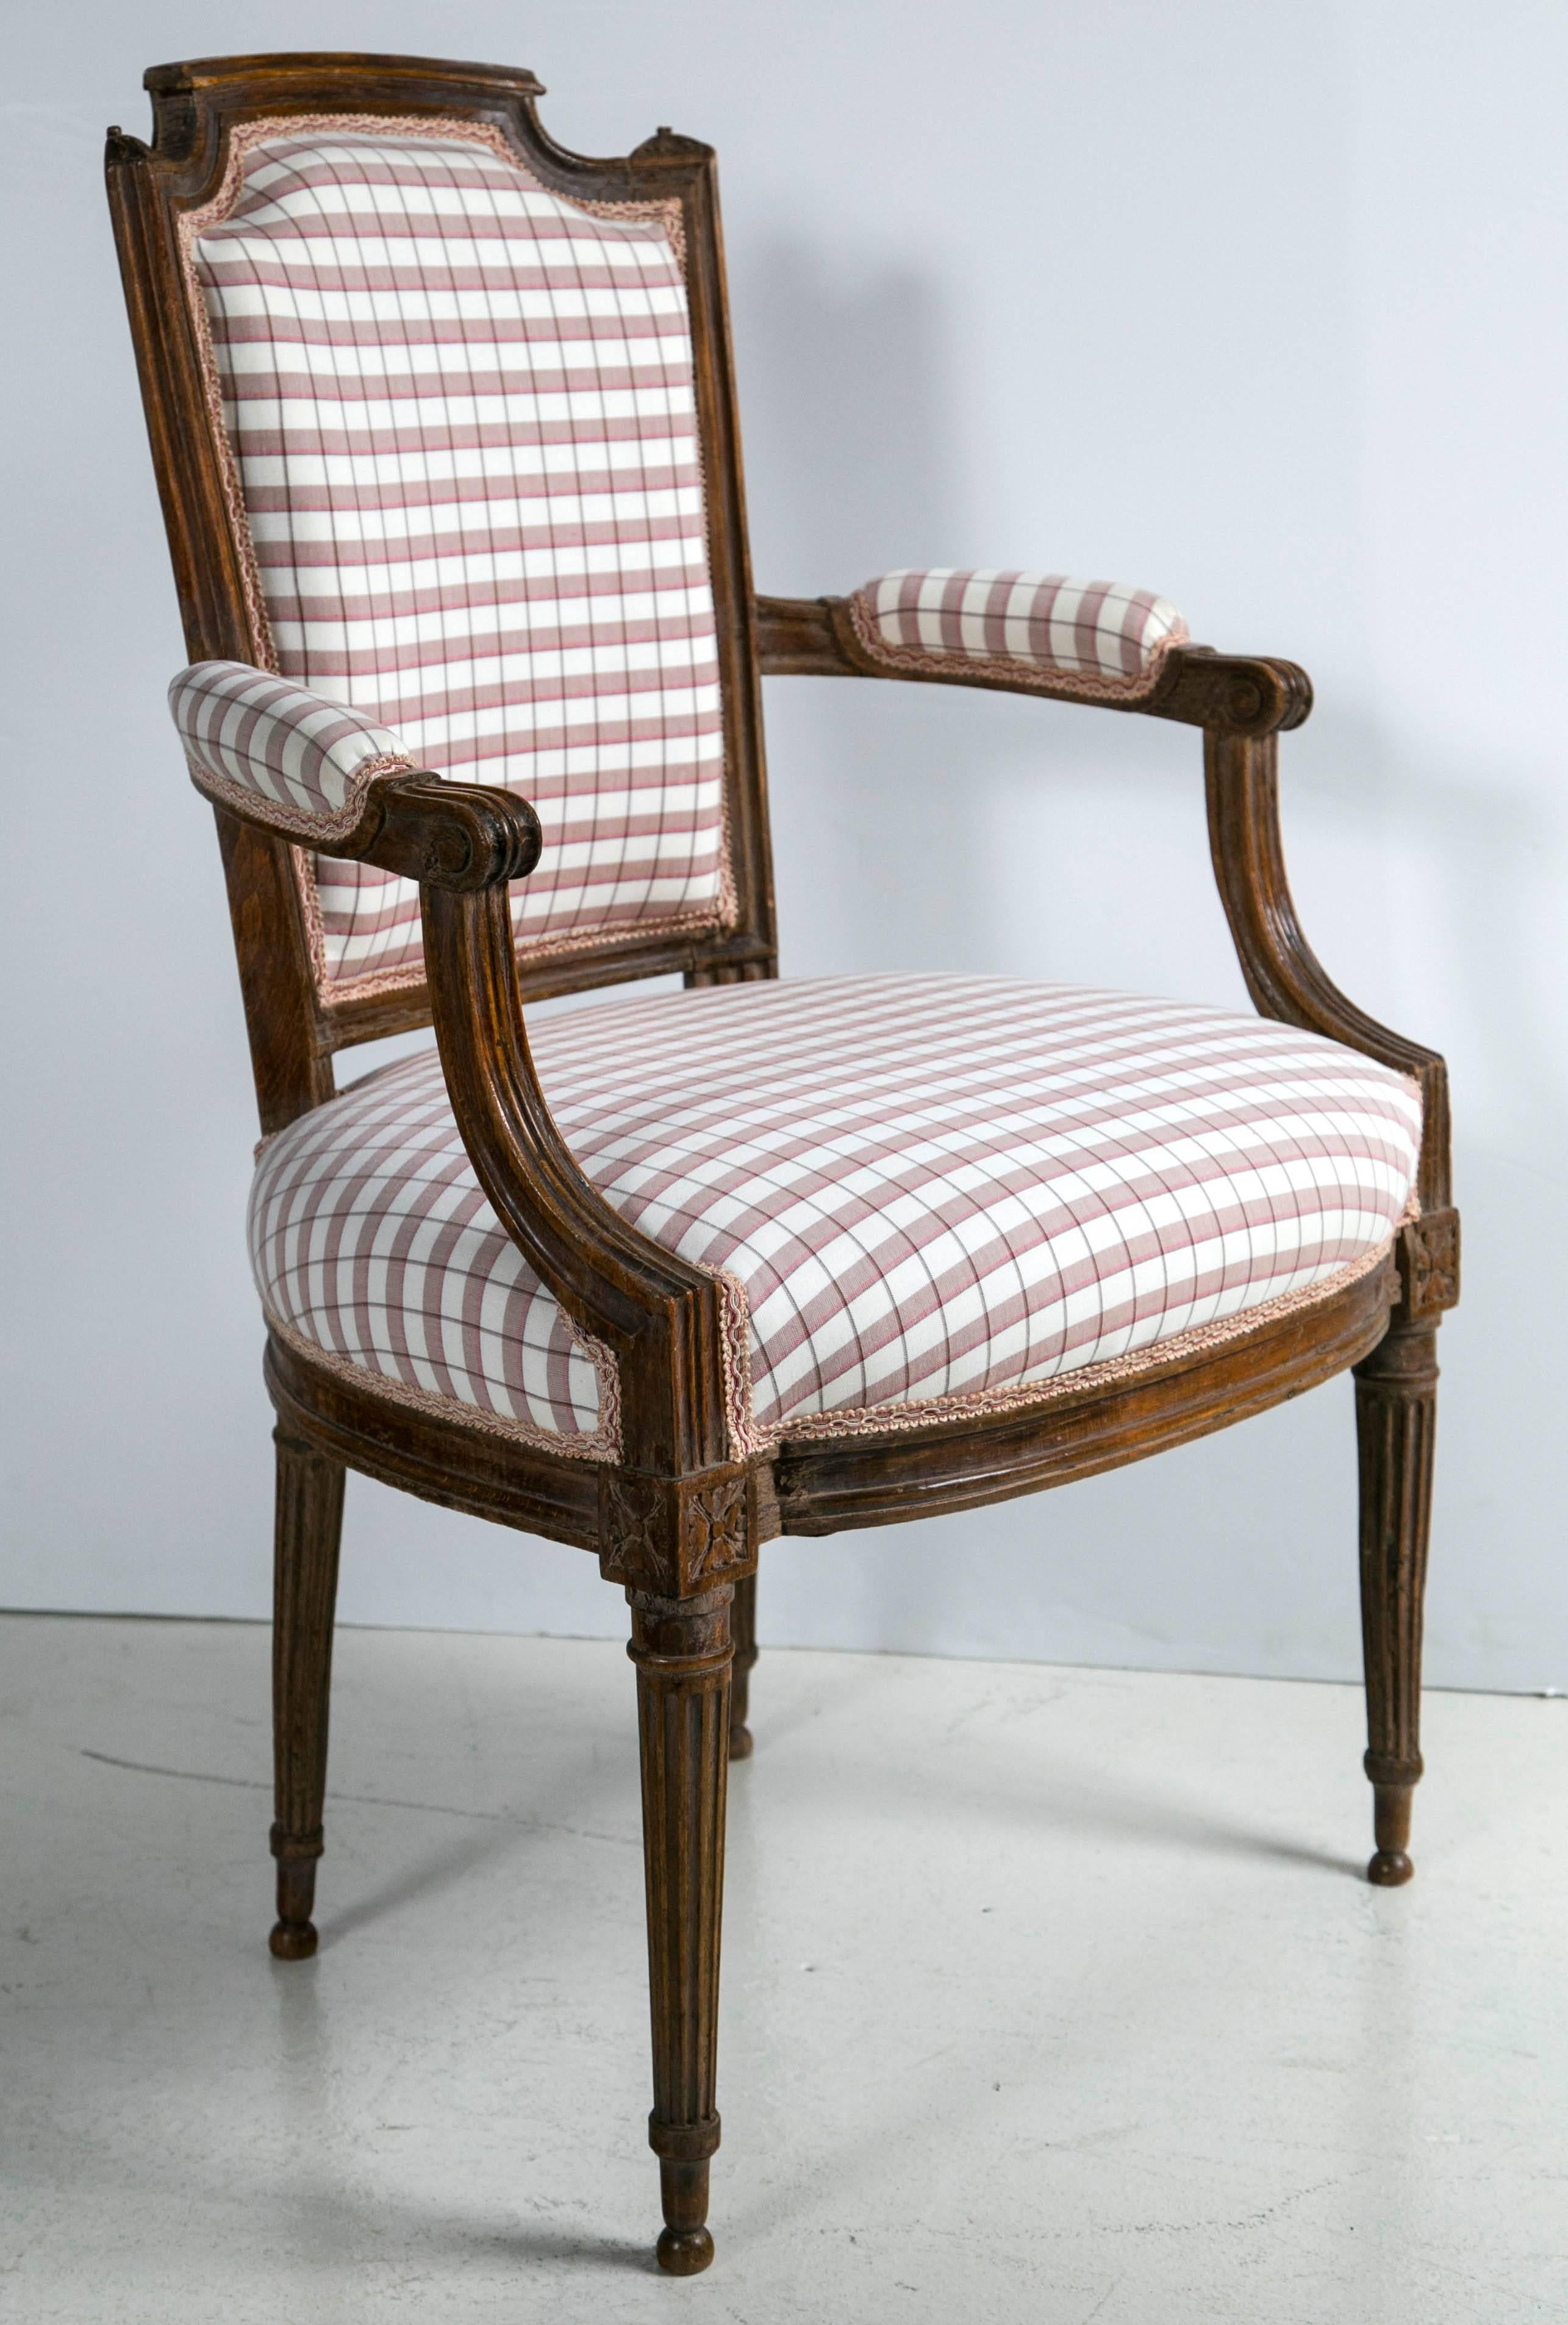 19th century French Directoire bergère in walnut with new cotton plaid Swedish upholstery.